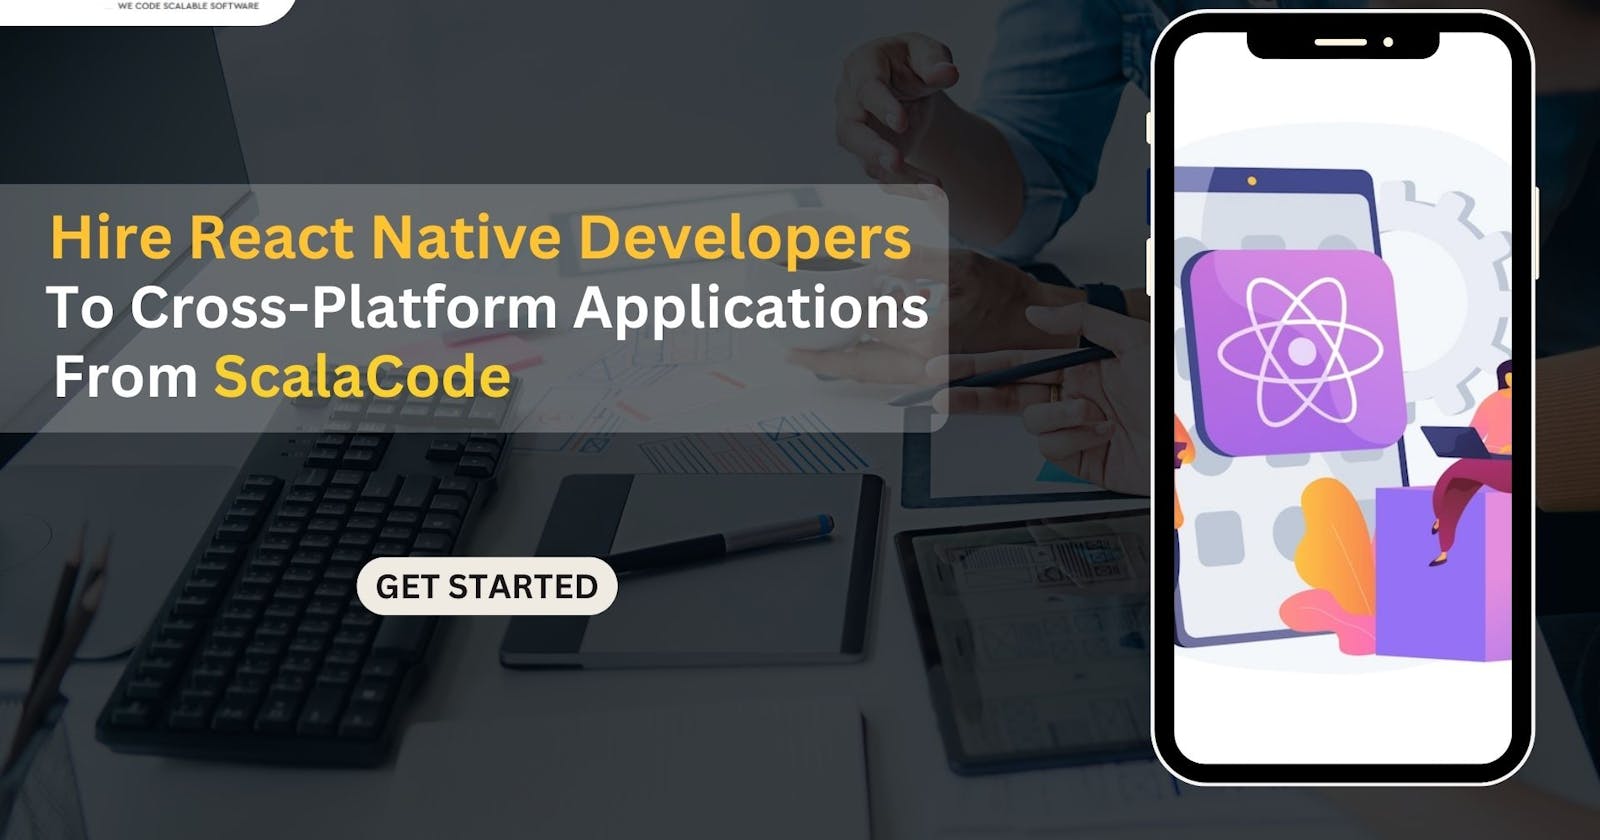 Hire React Native Developers to Build Scalable Cross-Platform Applications From ScalaCode